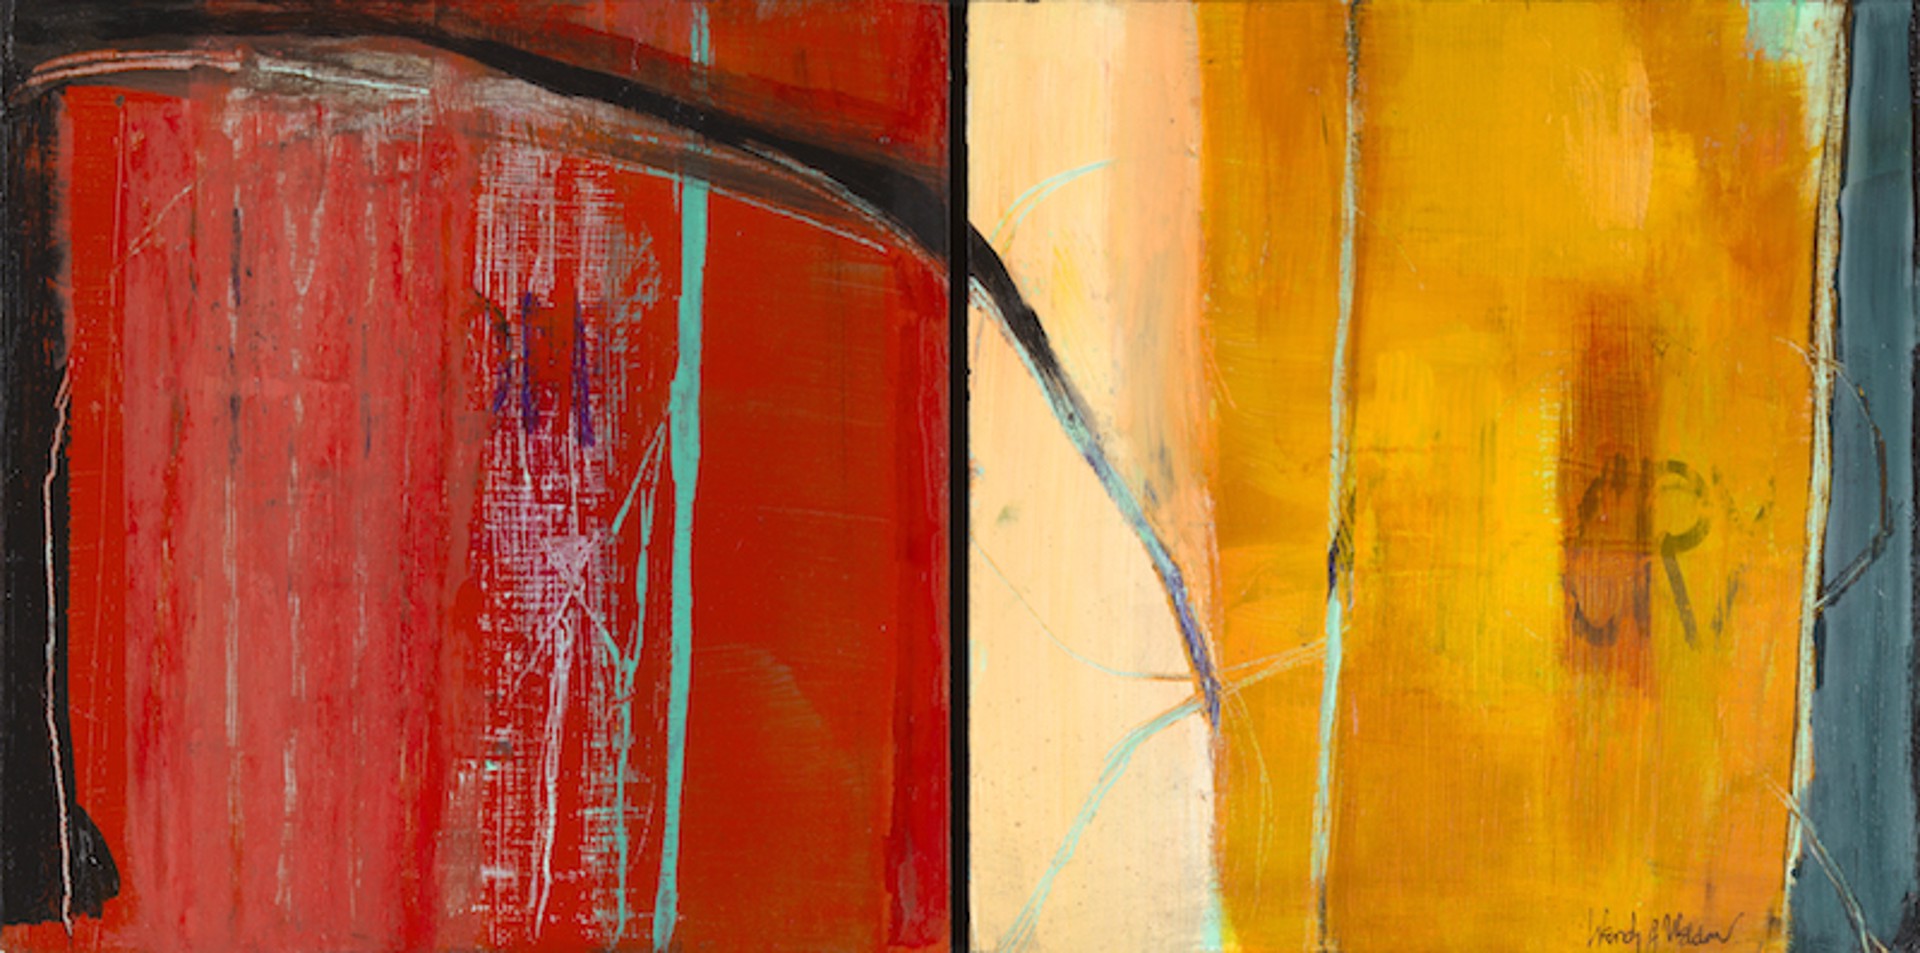 All Women All Cry (Diptych) by Wendy Weldon